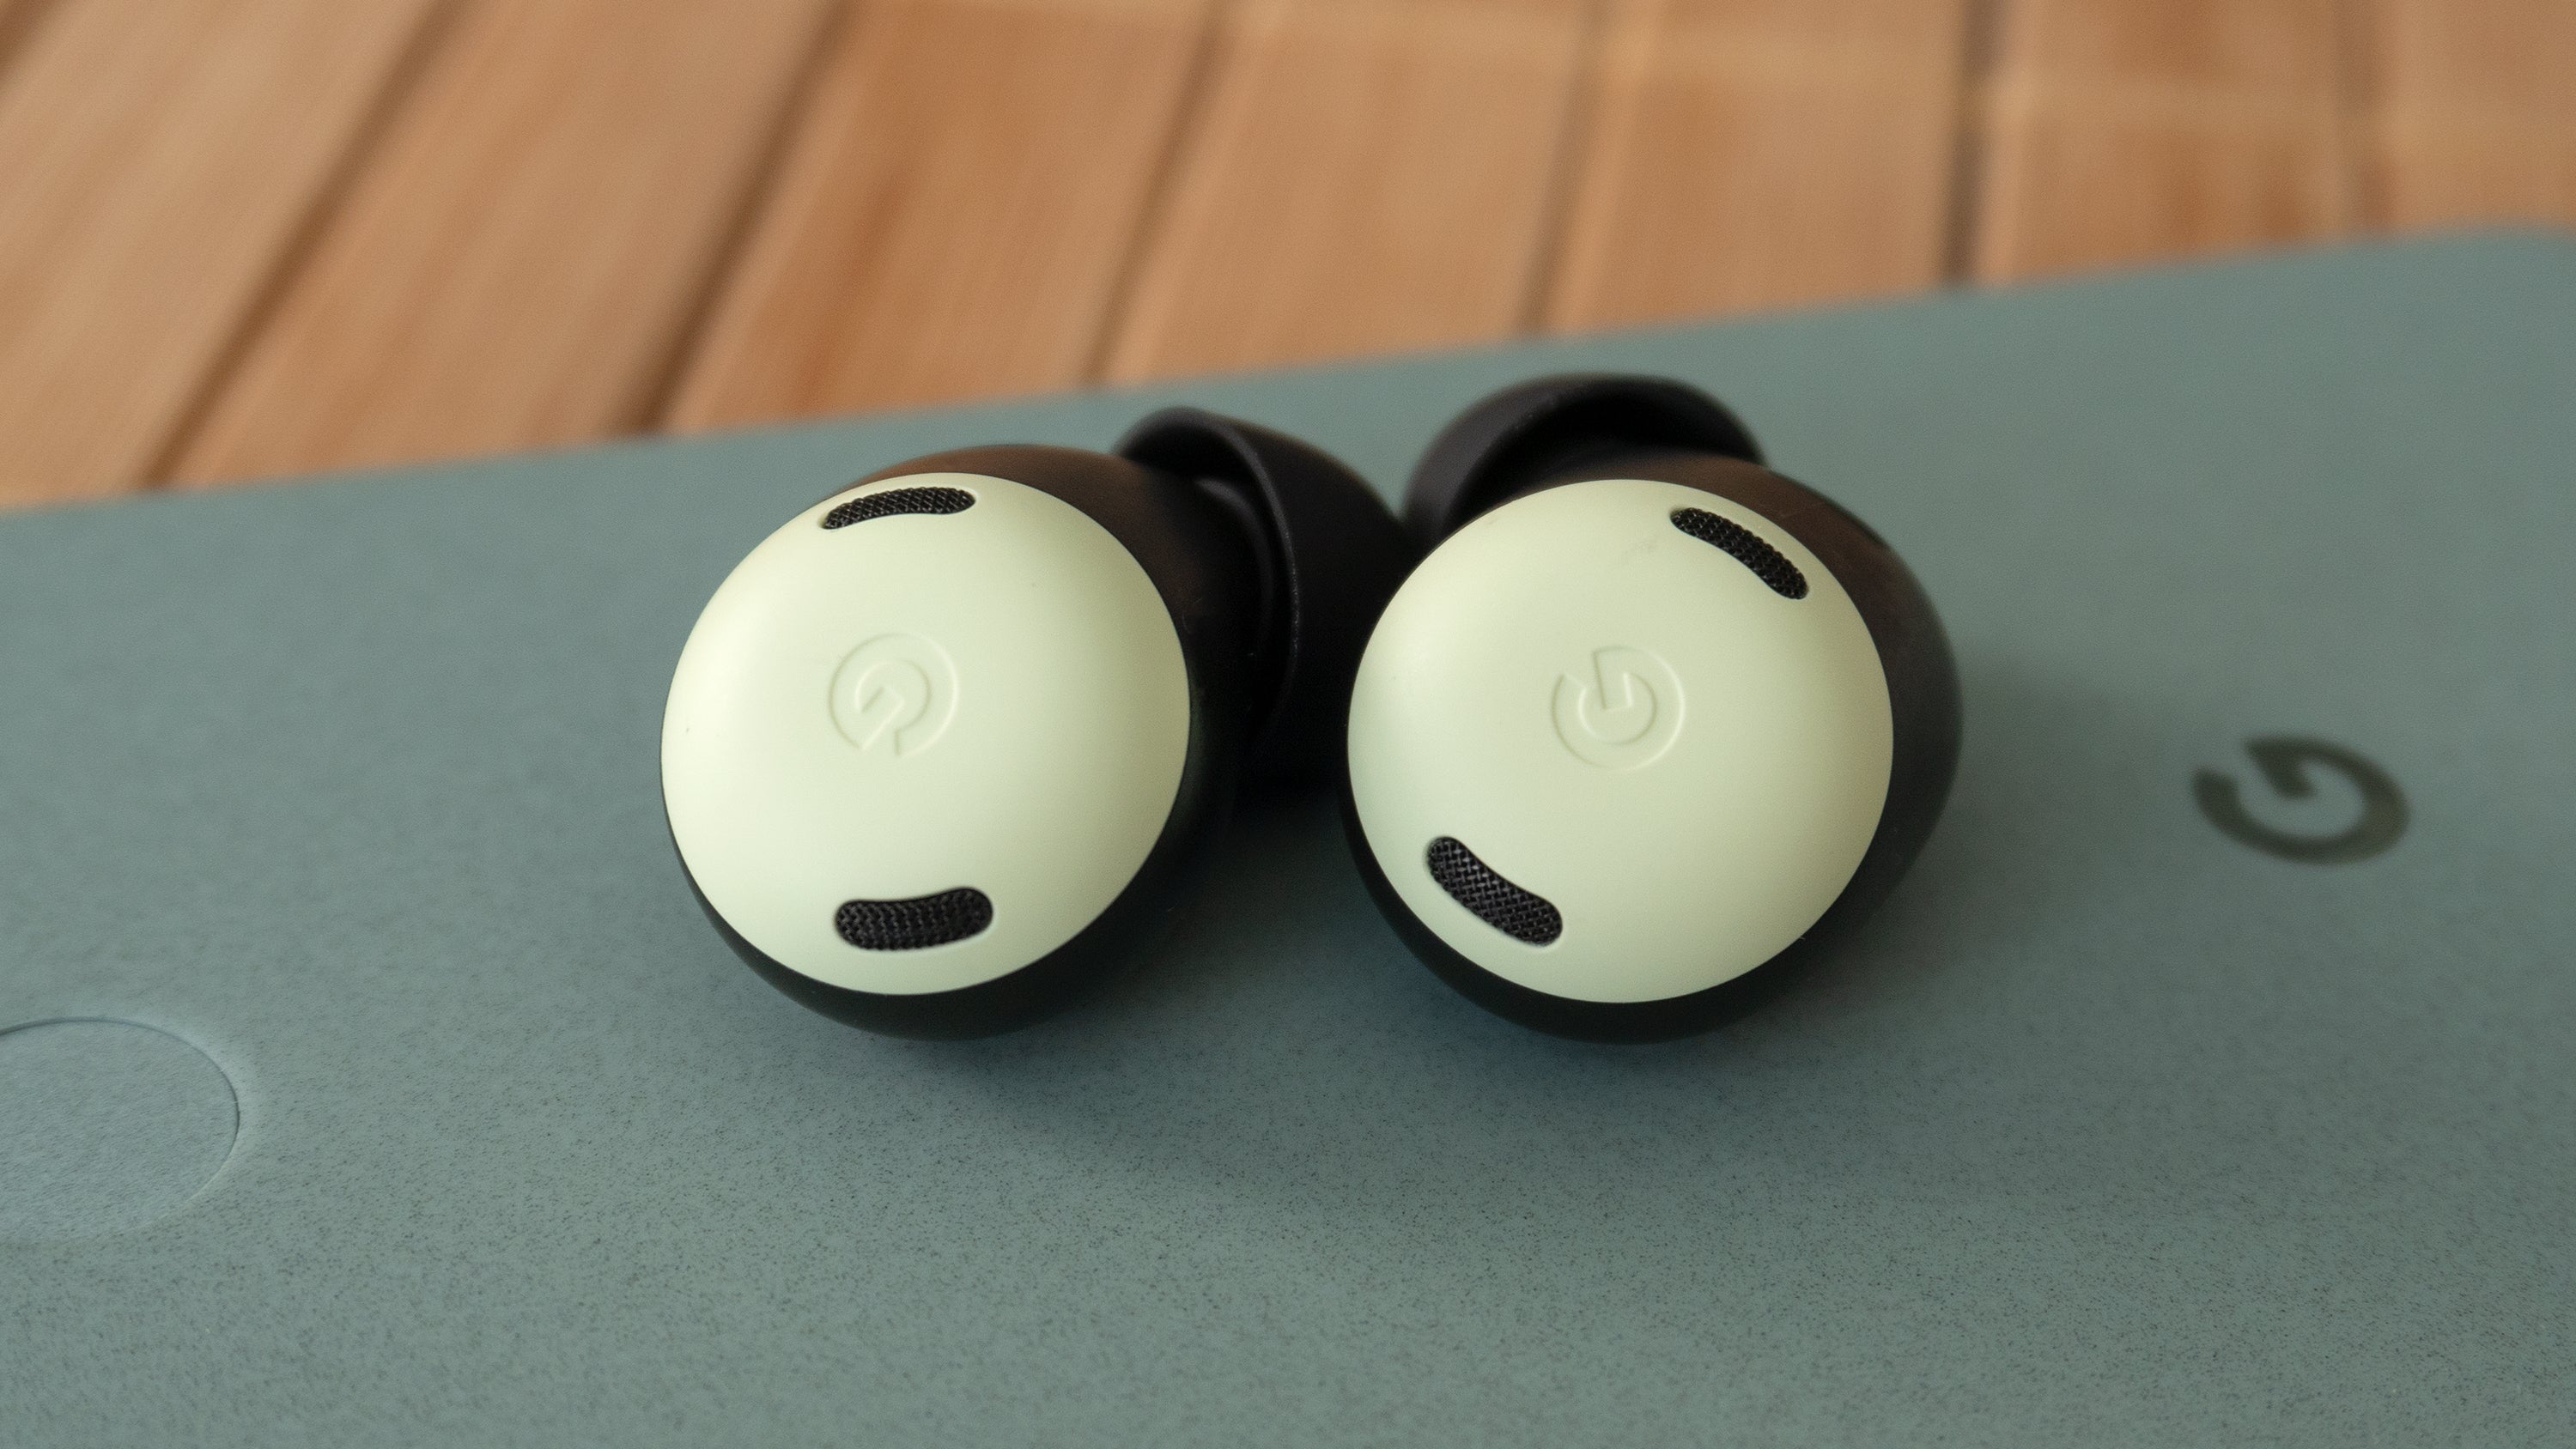 11-millimetre speaker drivers inside the Pixel Buds Pro offer excellent sound quality with satisfying bass performance. (Photo: Andrew Liszewski | Gizmodo)